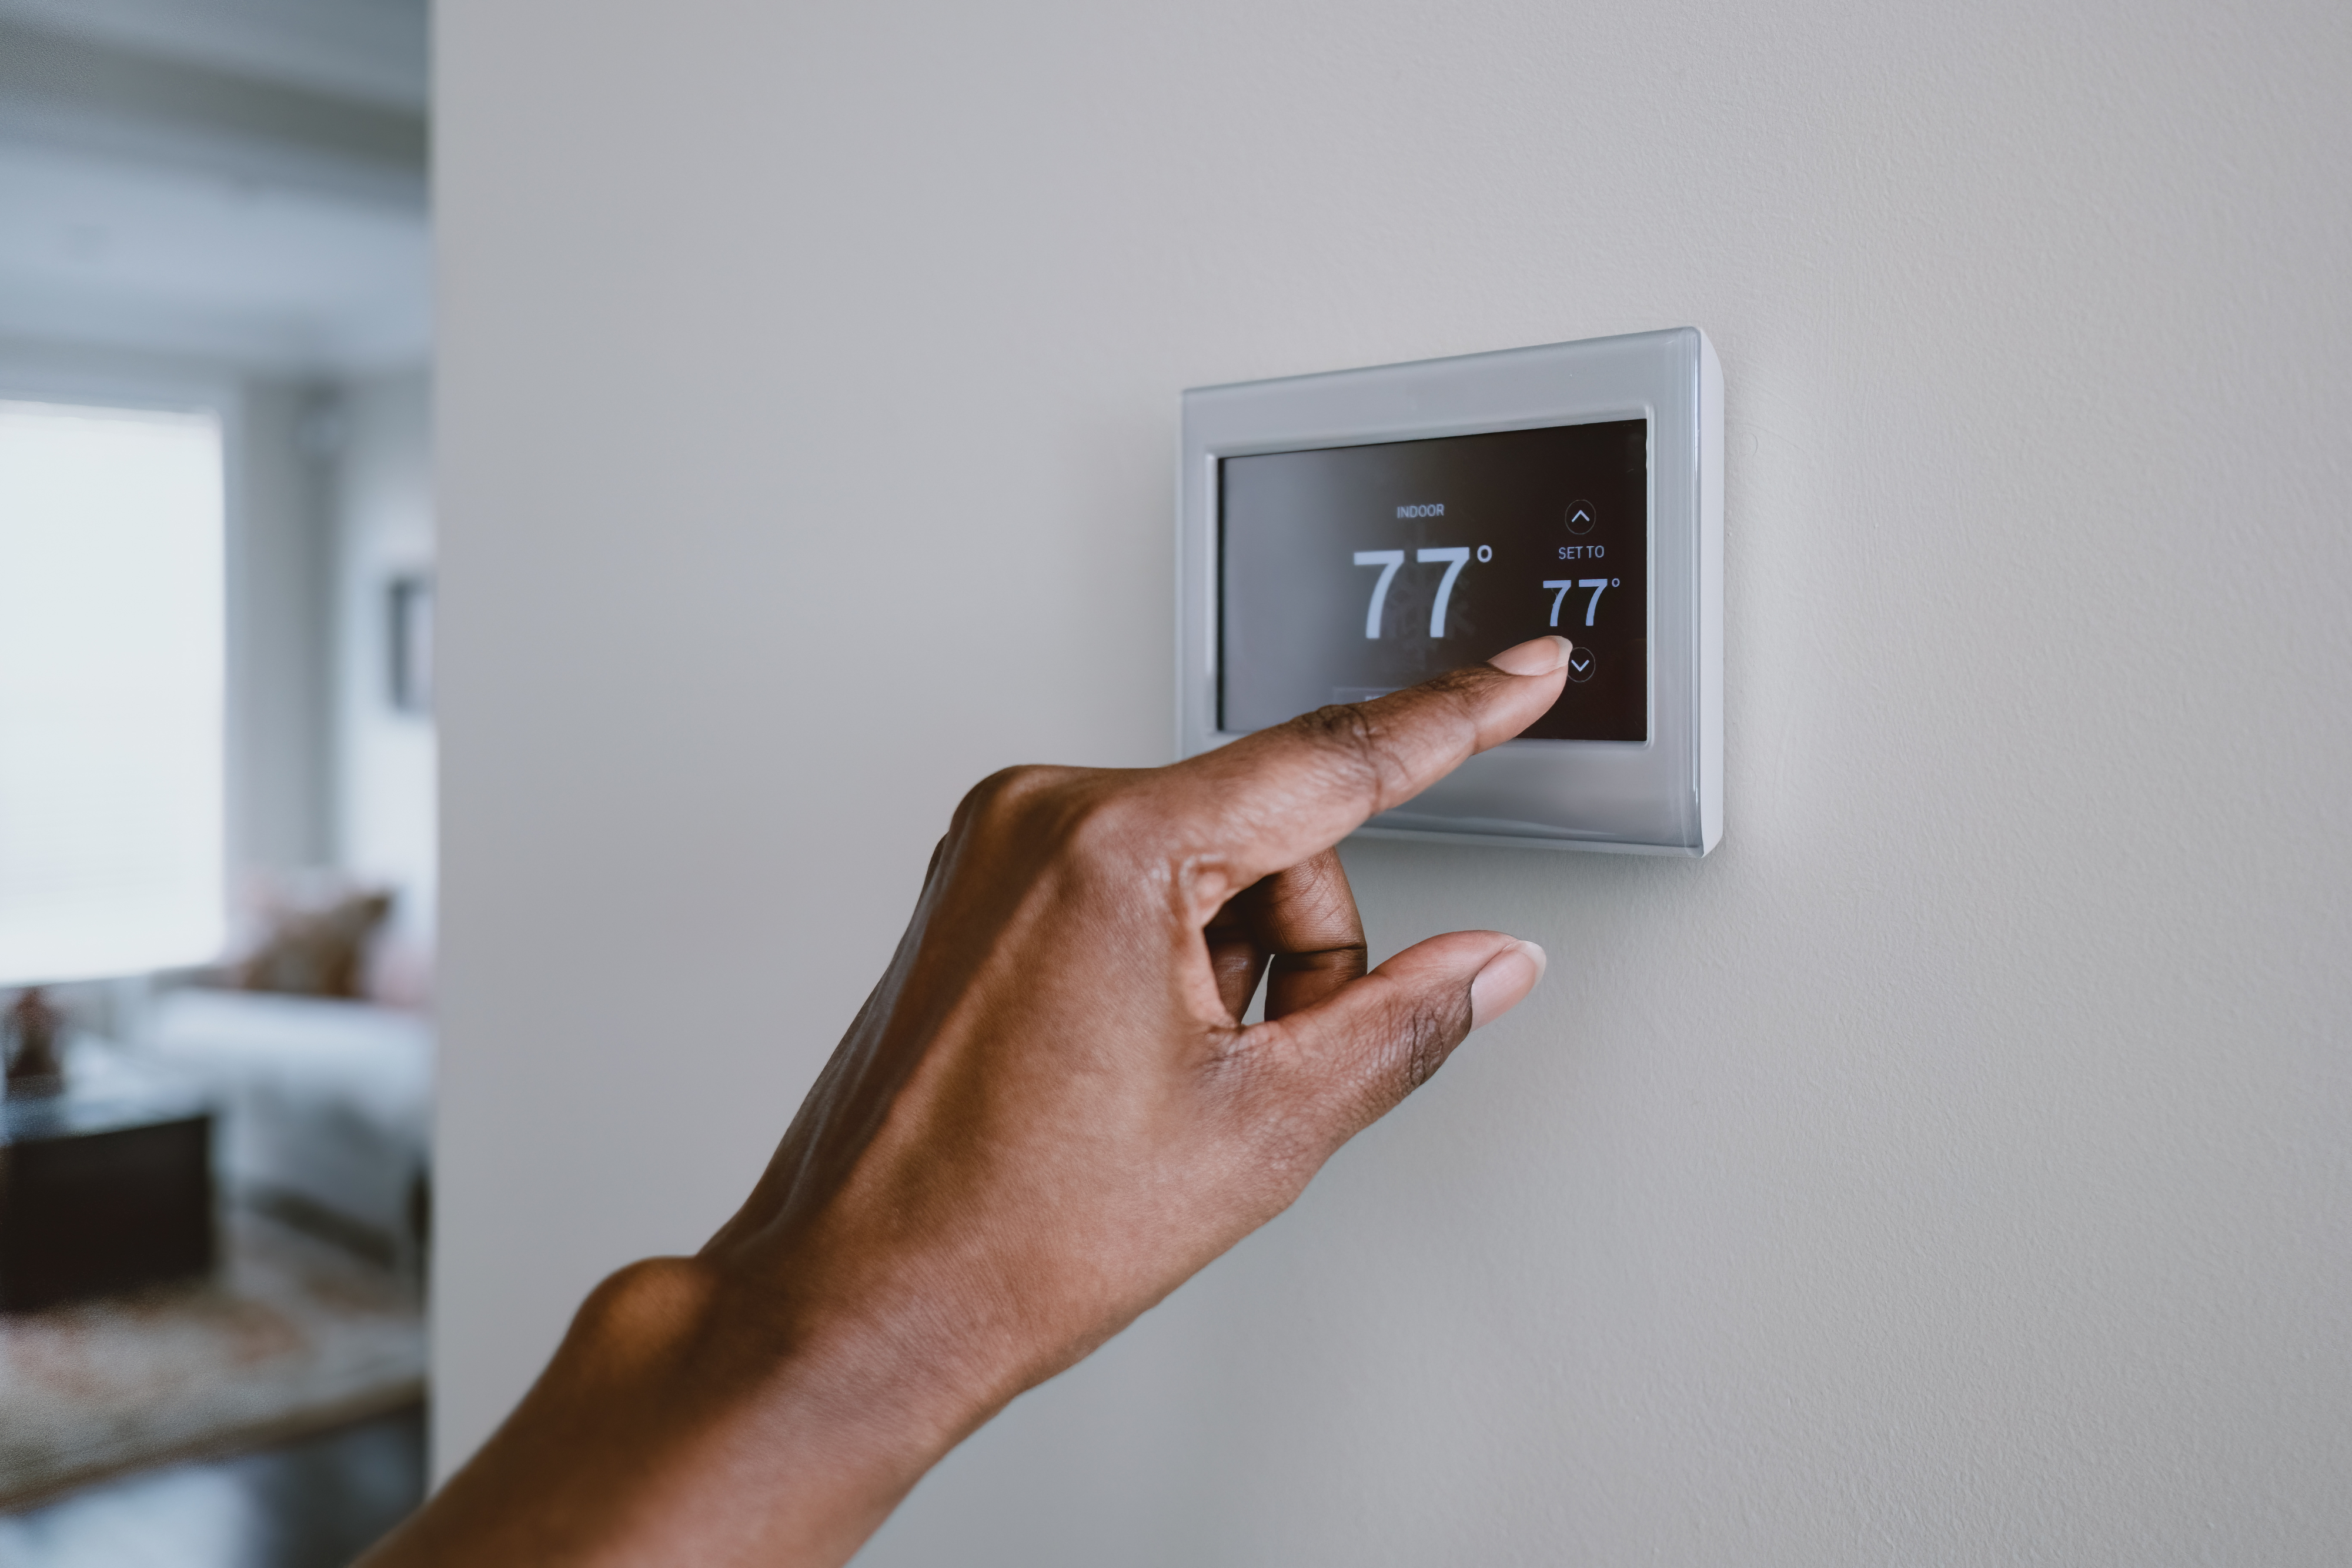 Person adjusting thermostat to 77 degrees in a home setting